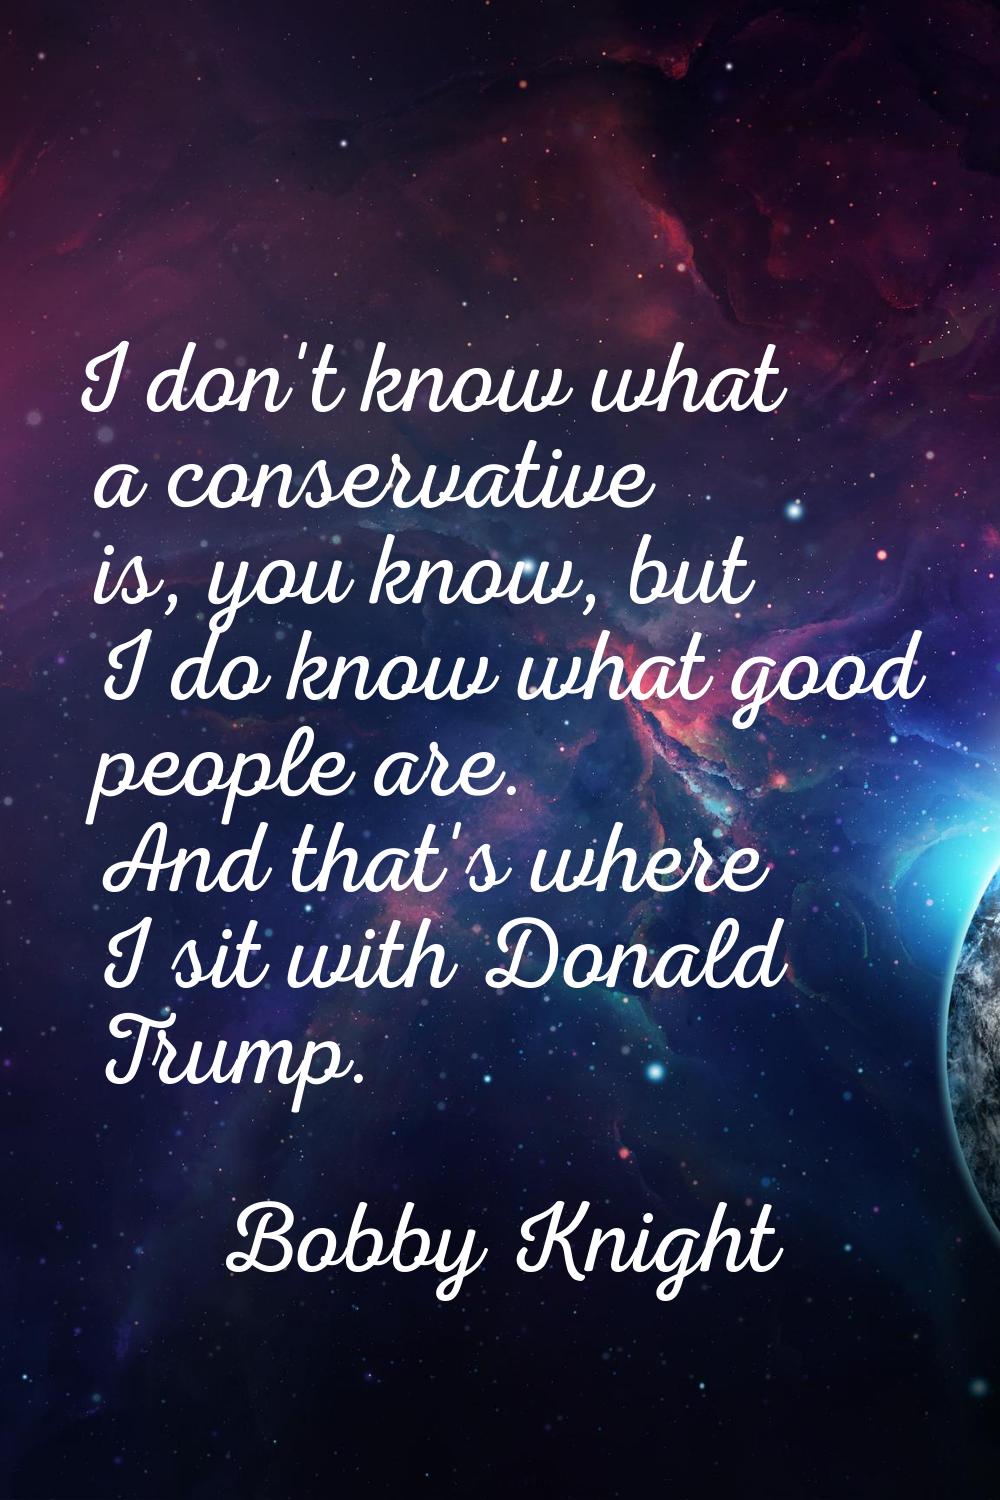 I don't know what a conservative is, you know, but I do know what good people are. And that's where